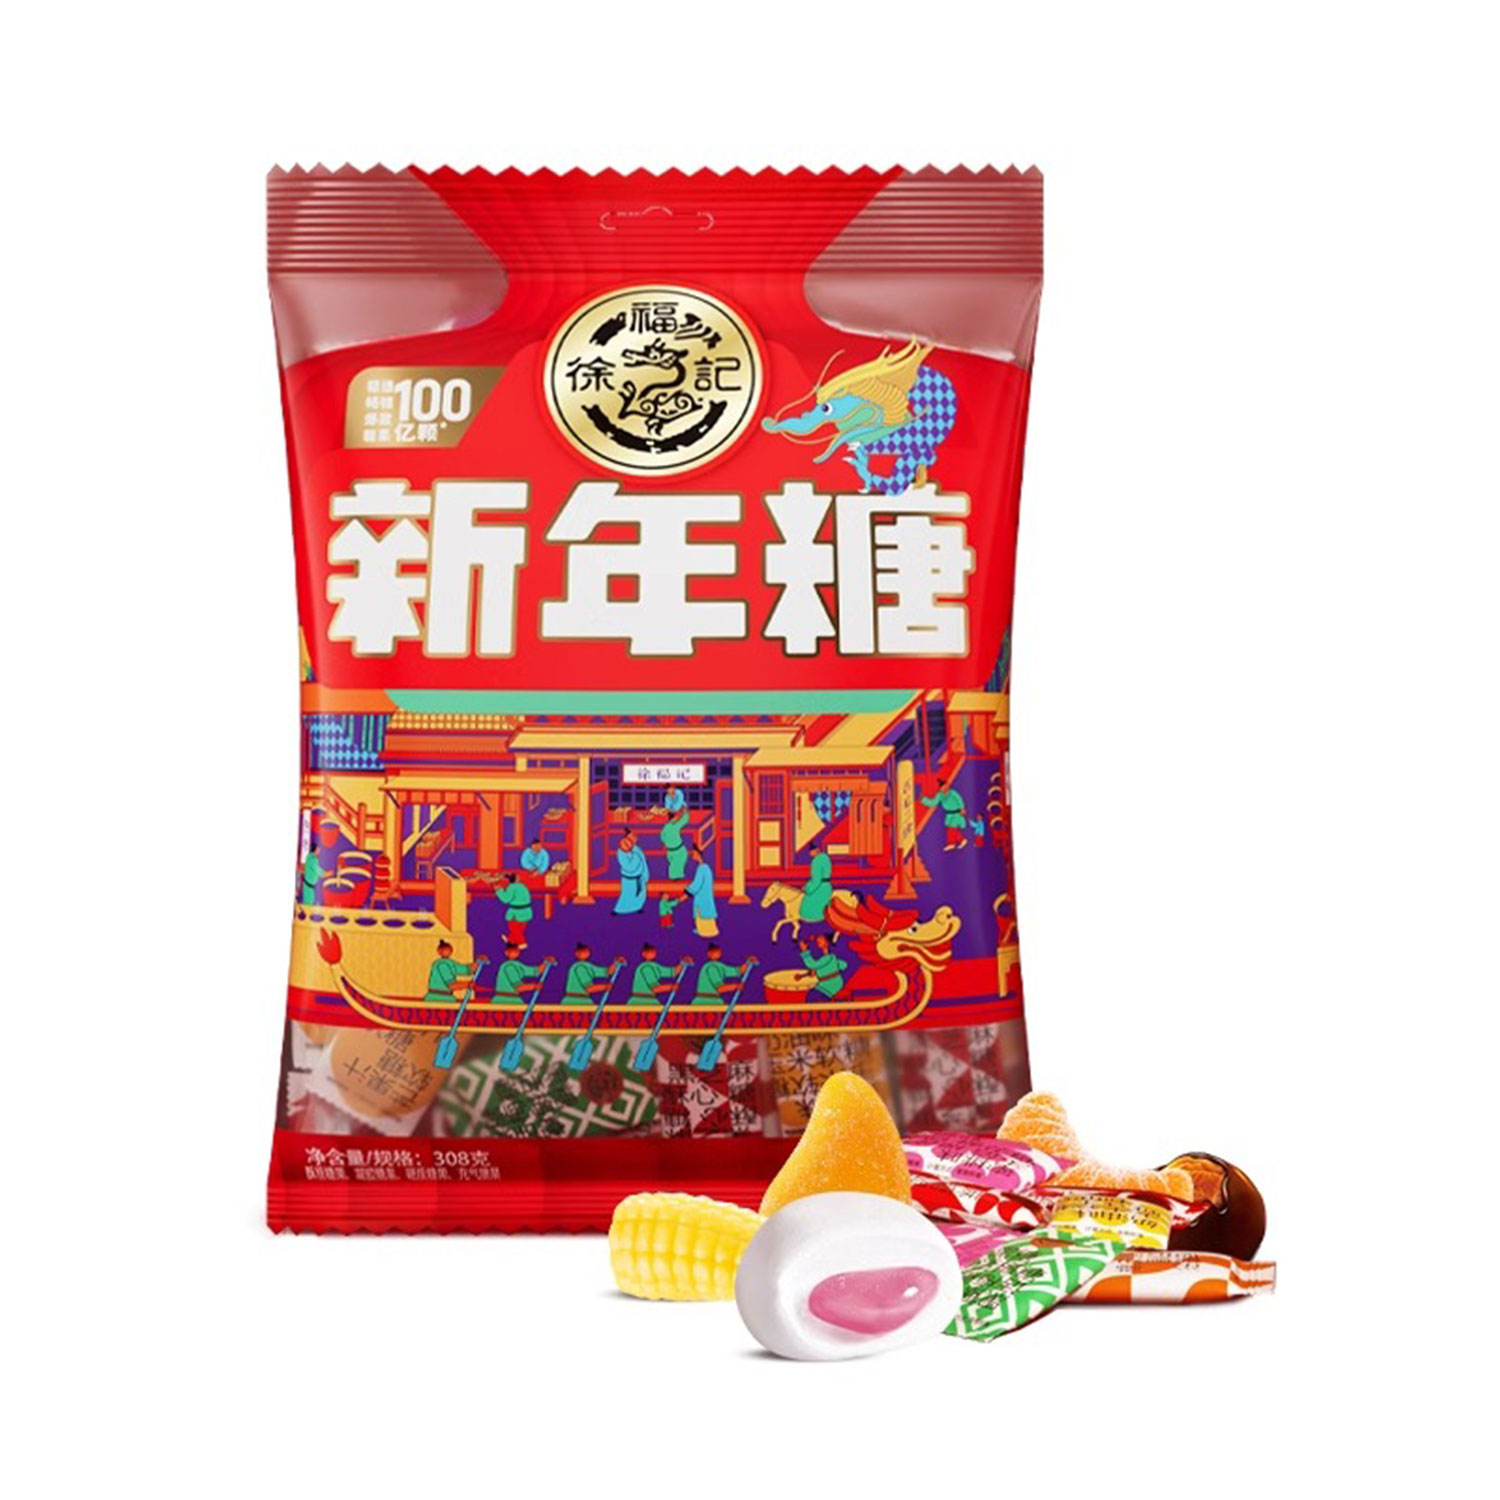 Hsu Fu Chi New Year Candy Bag 308g-eBest-Confectionery,Snacks & Confectionery